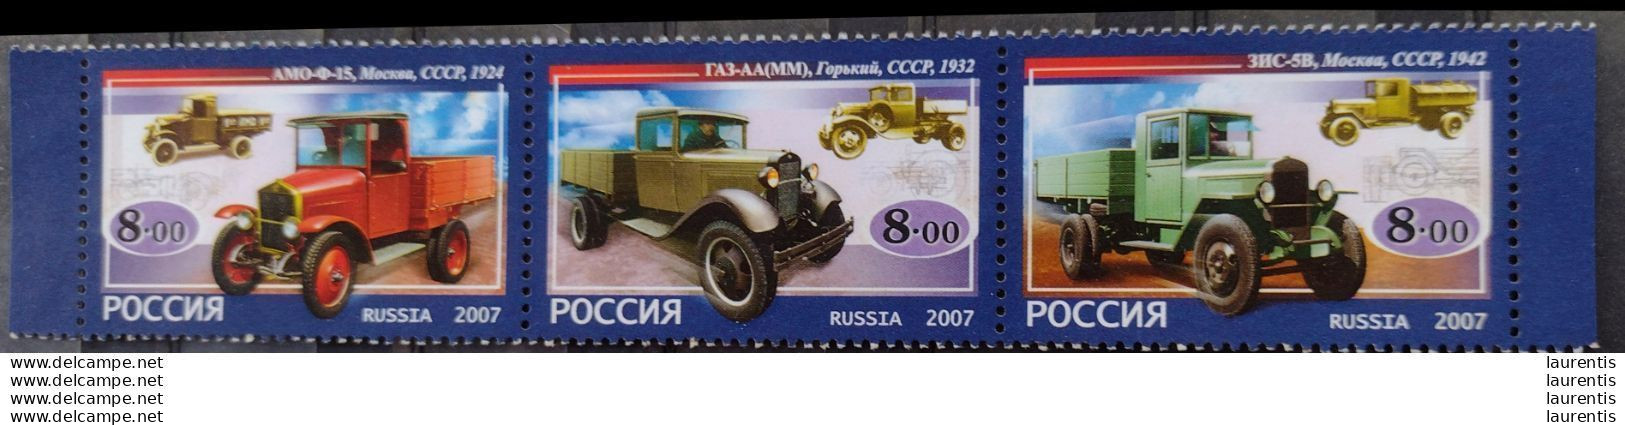 D7467. Trucks - Camions - Russia Yv 7016-18 MNH - 0,95 (3) - Camiones